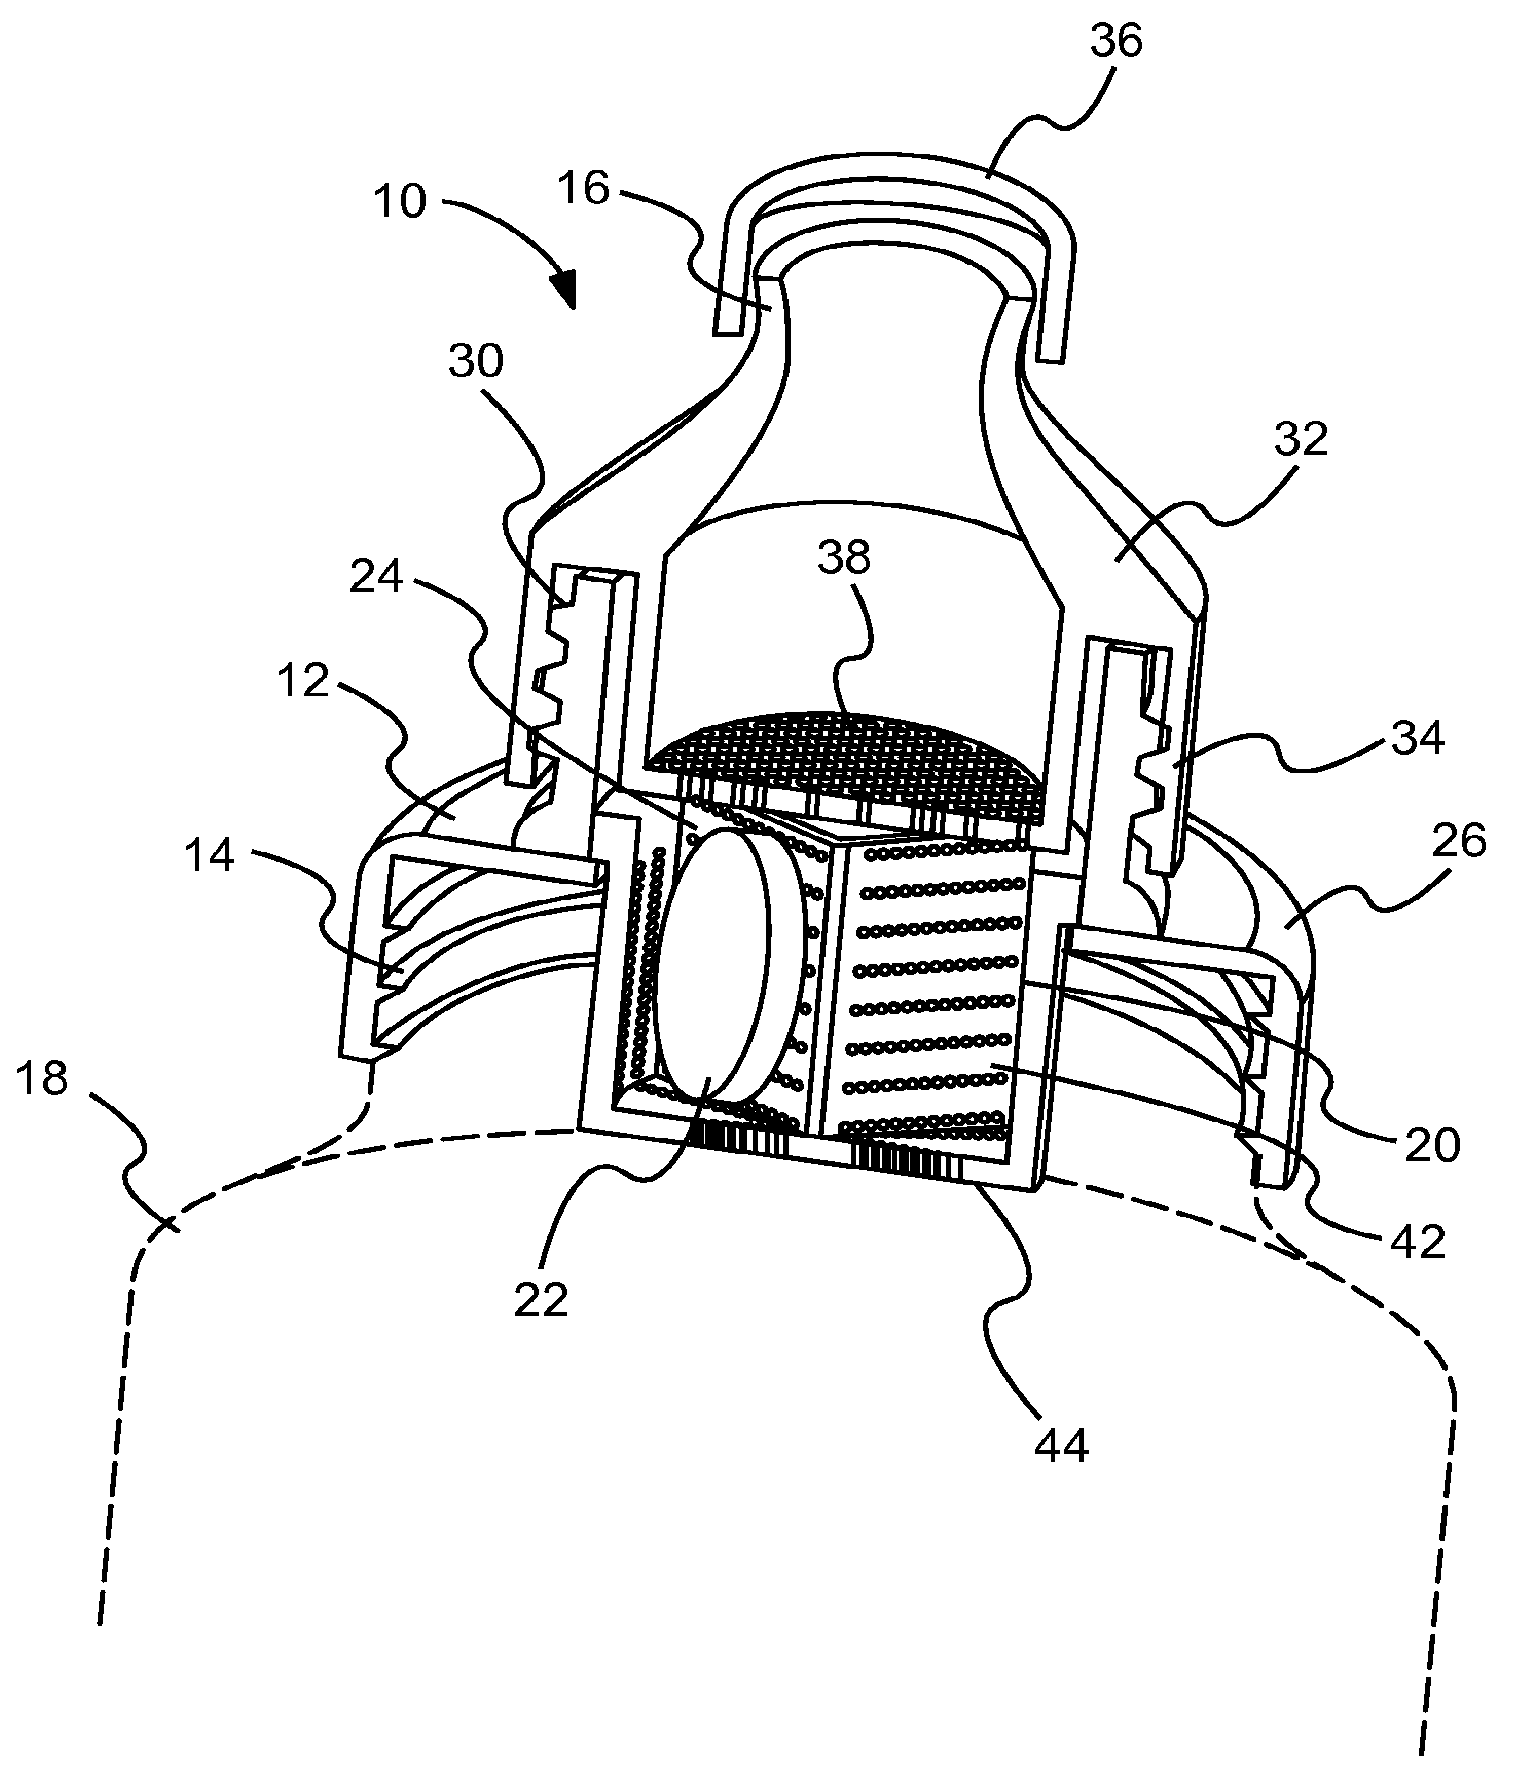 Water container cap for holding additives to water